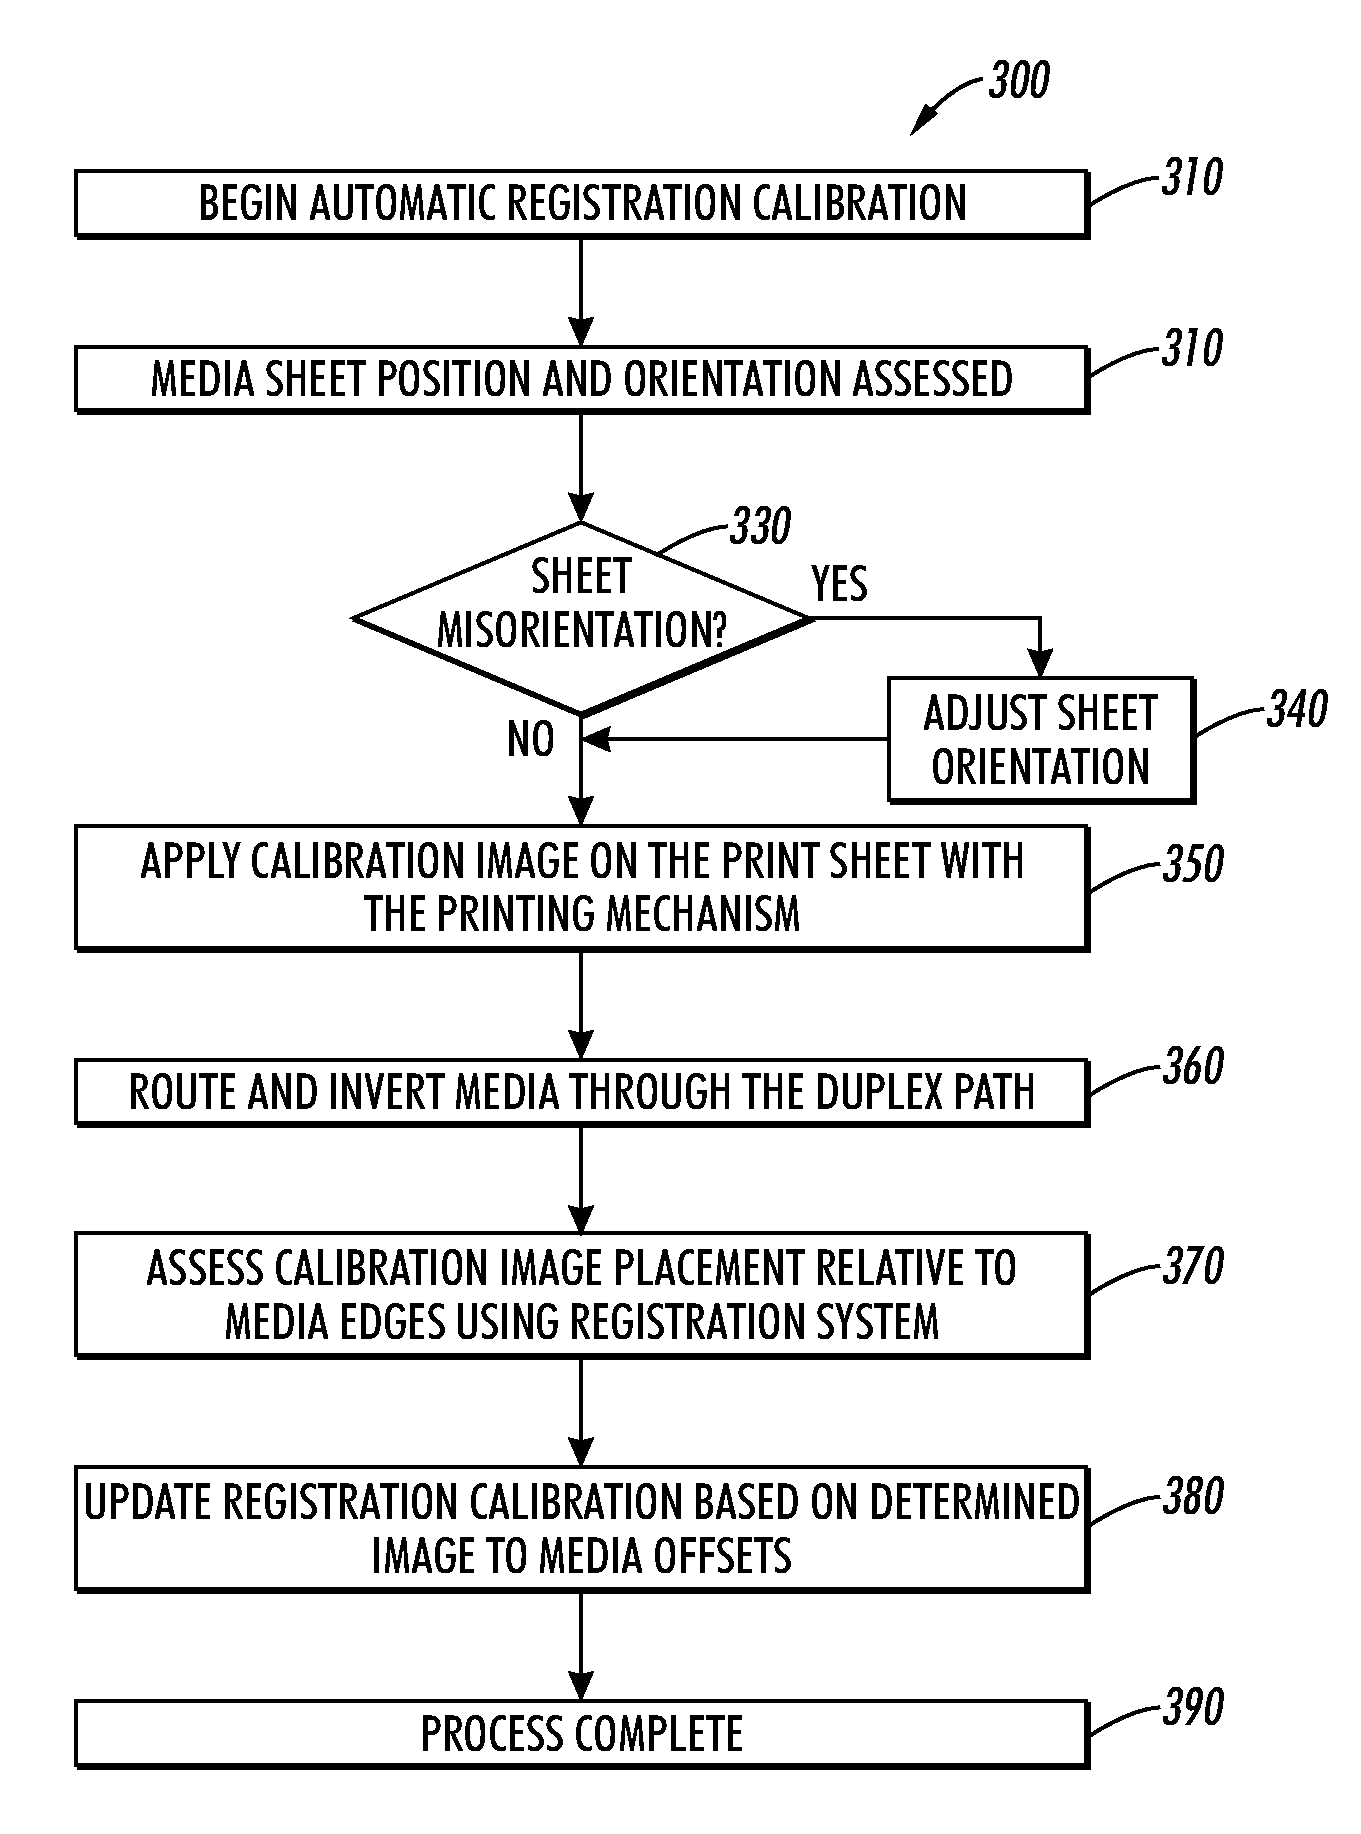 Automated method and system for self-calibration of image on media sheets using an auto duplex media path